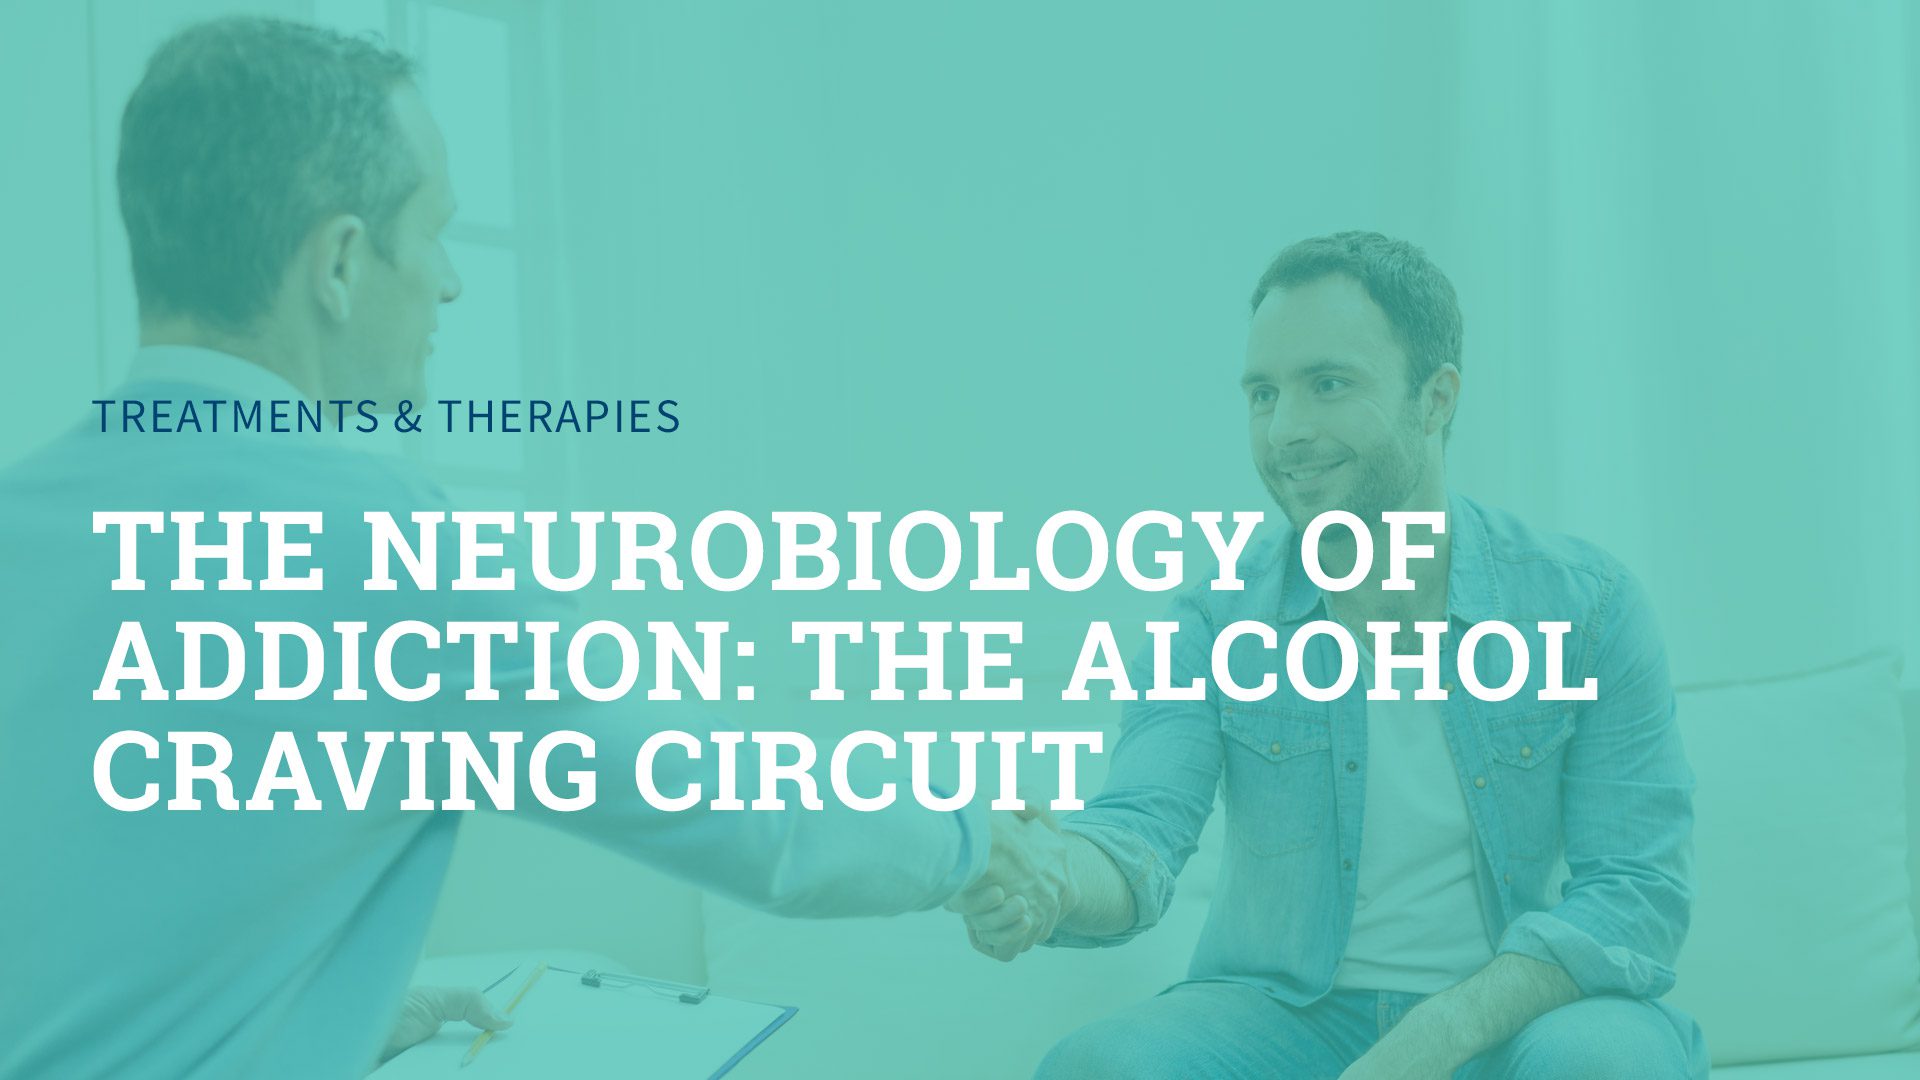 The Neurobiology of Addiction: The Alcohol Craving Circuit